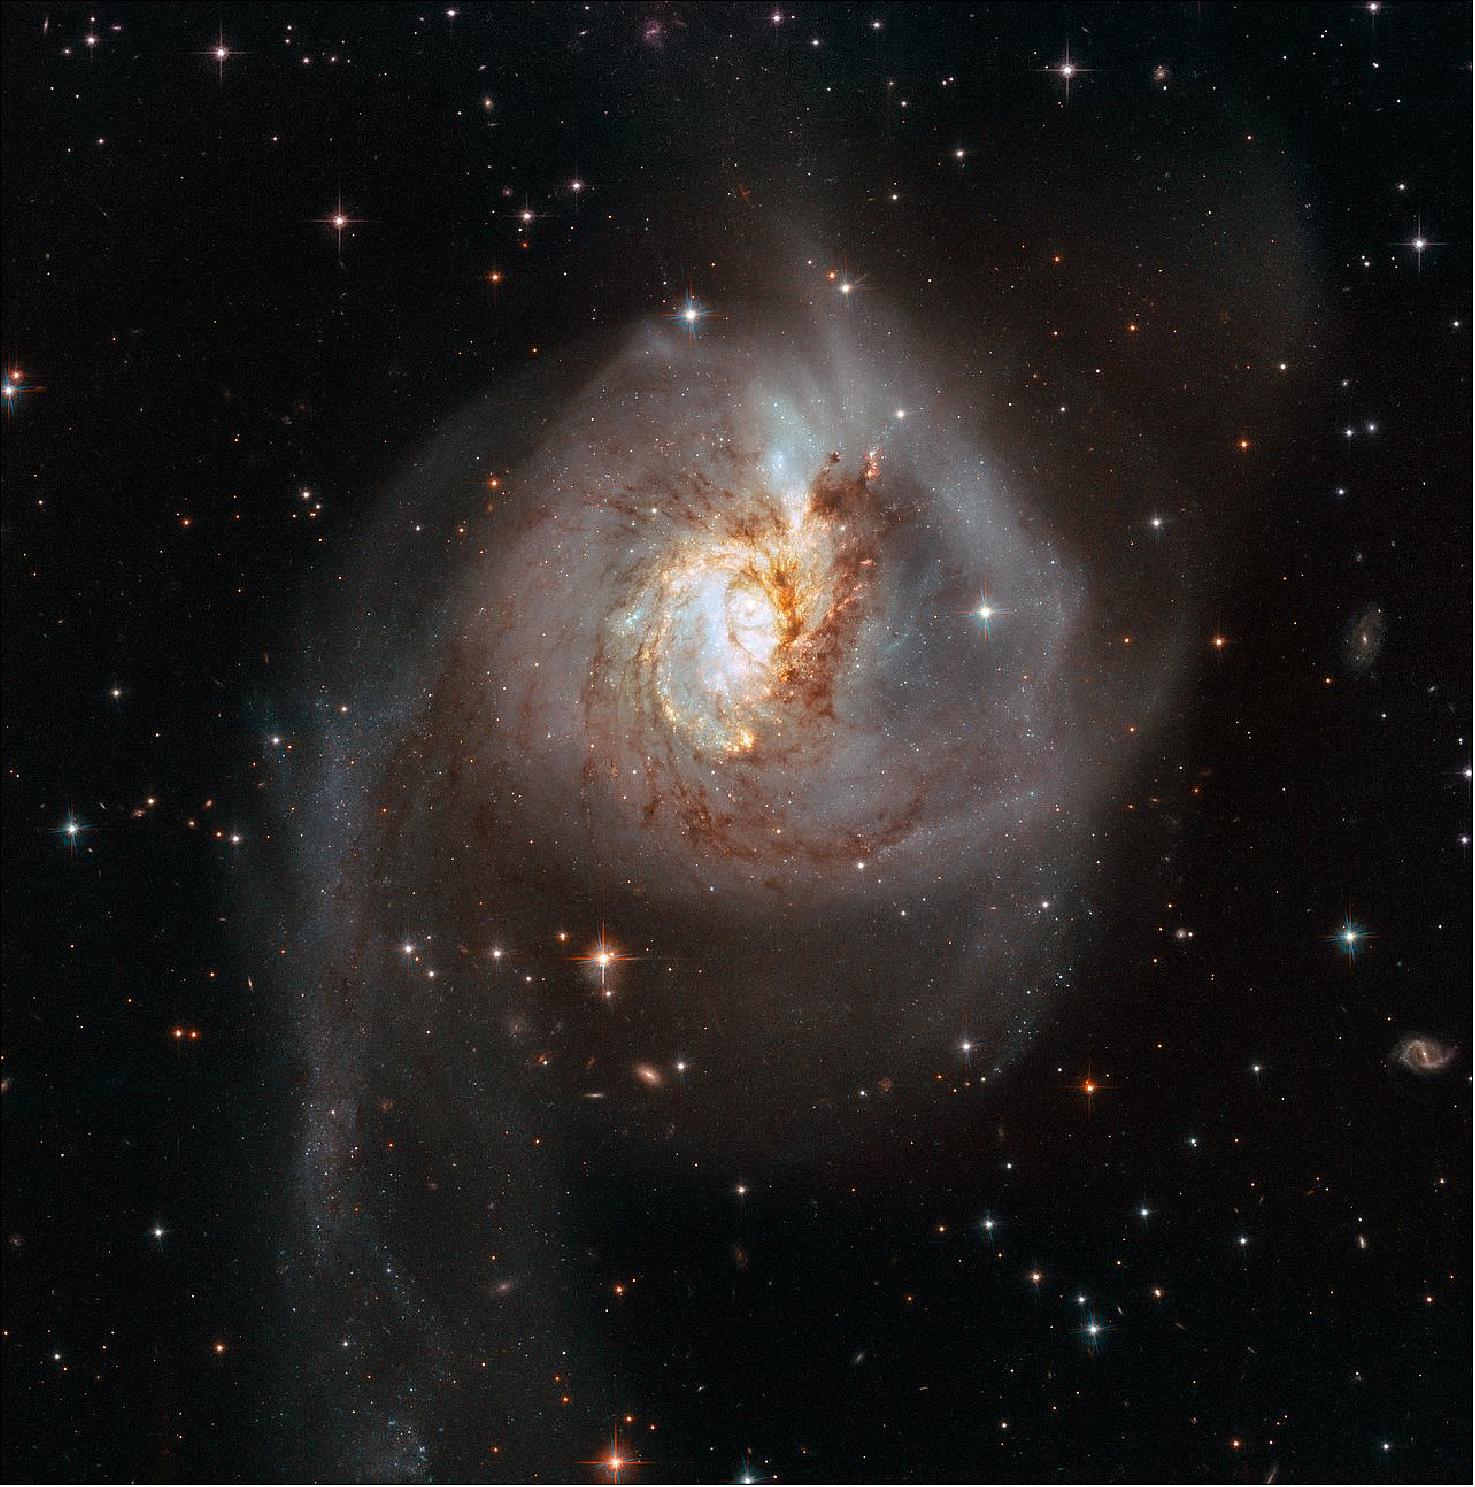 Figure 34: This image, taken with the Wide Field Camera 3 (WFC3) and the Advanced Camera for Surveys (ACS), both installed on the NASA/ESA Hubble Space Telescope, shows the peculiar galaxy NGC 3256. The galaxy is about 100 million light-years from Earth and is the result of a past galactic merger, which created its distorted appearance. As such, NGC 3256 provides an ideal target to investigate starbursts that have been triggered by galaxy mergers (image credit: ESA/Hubble, NASA, CC BY 4.0)